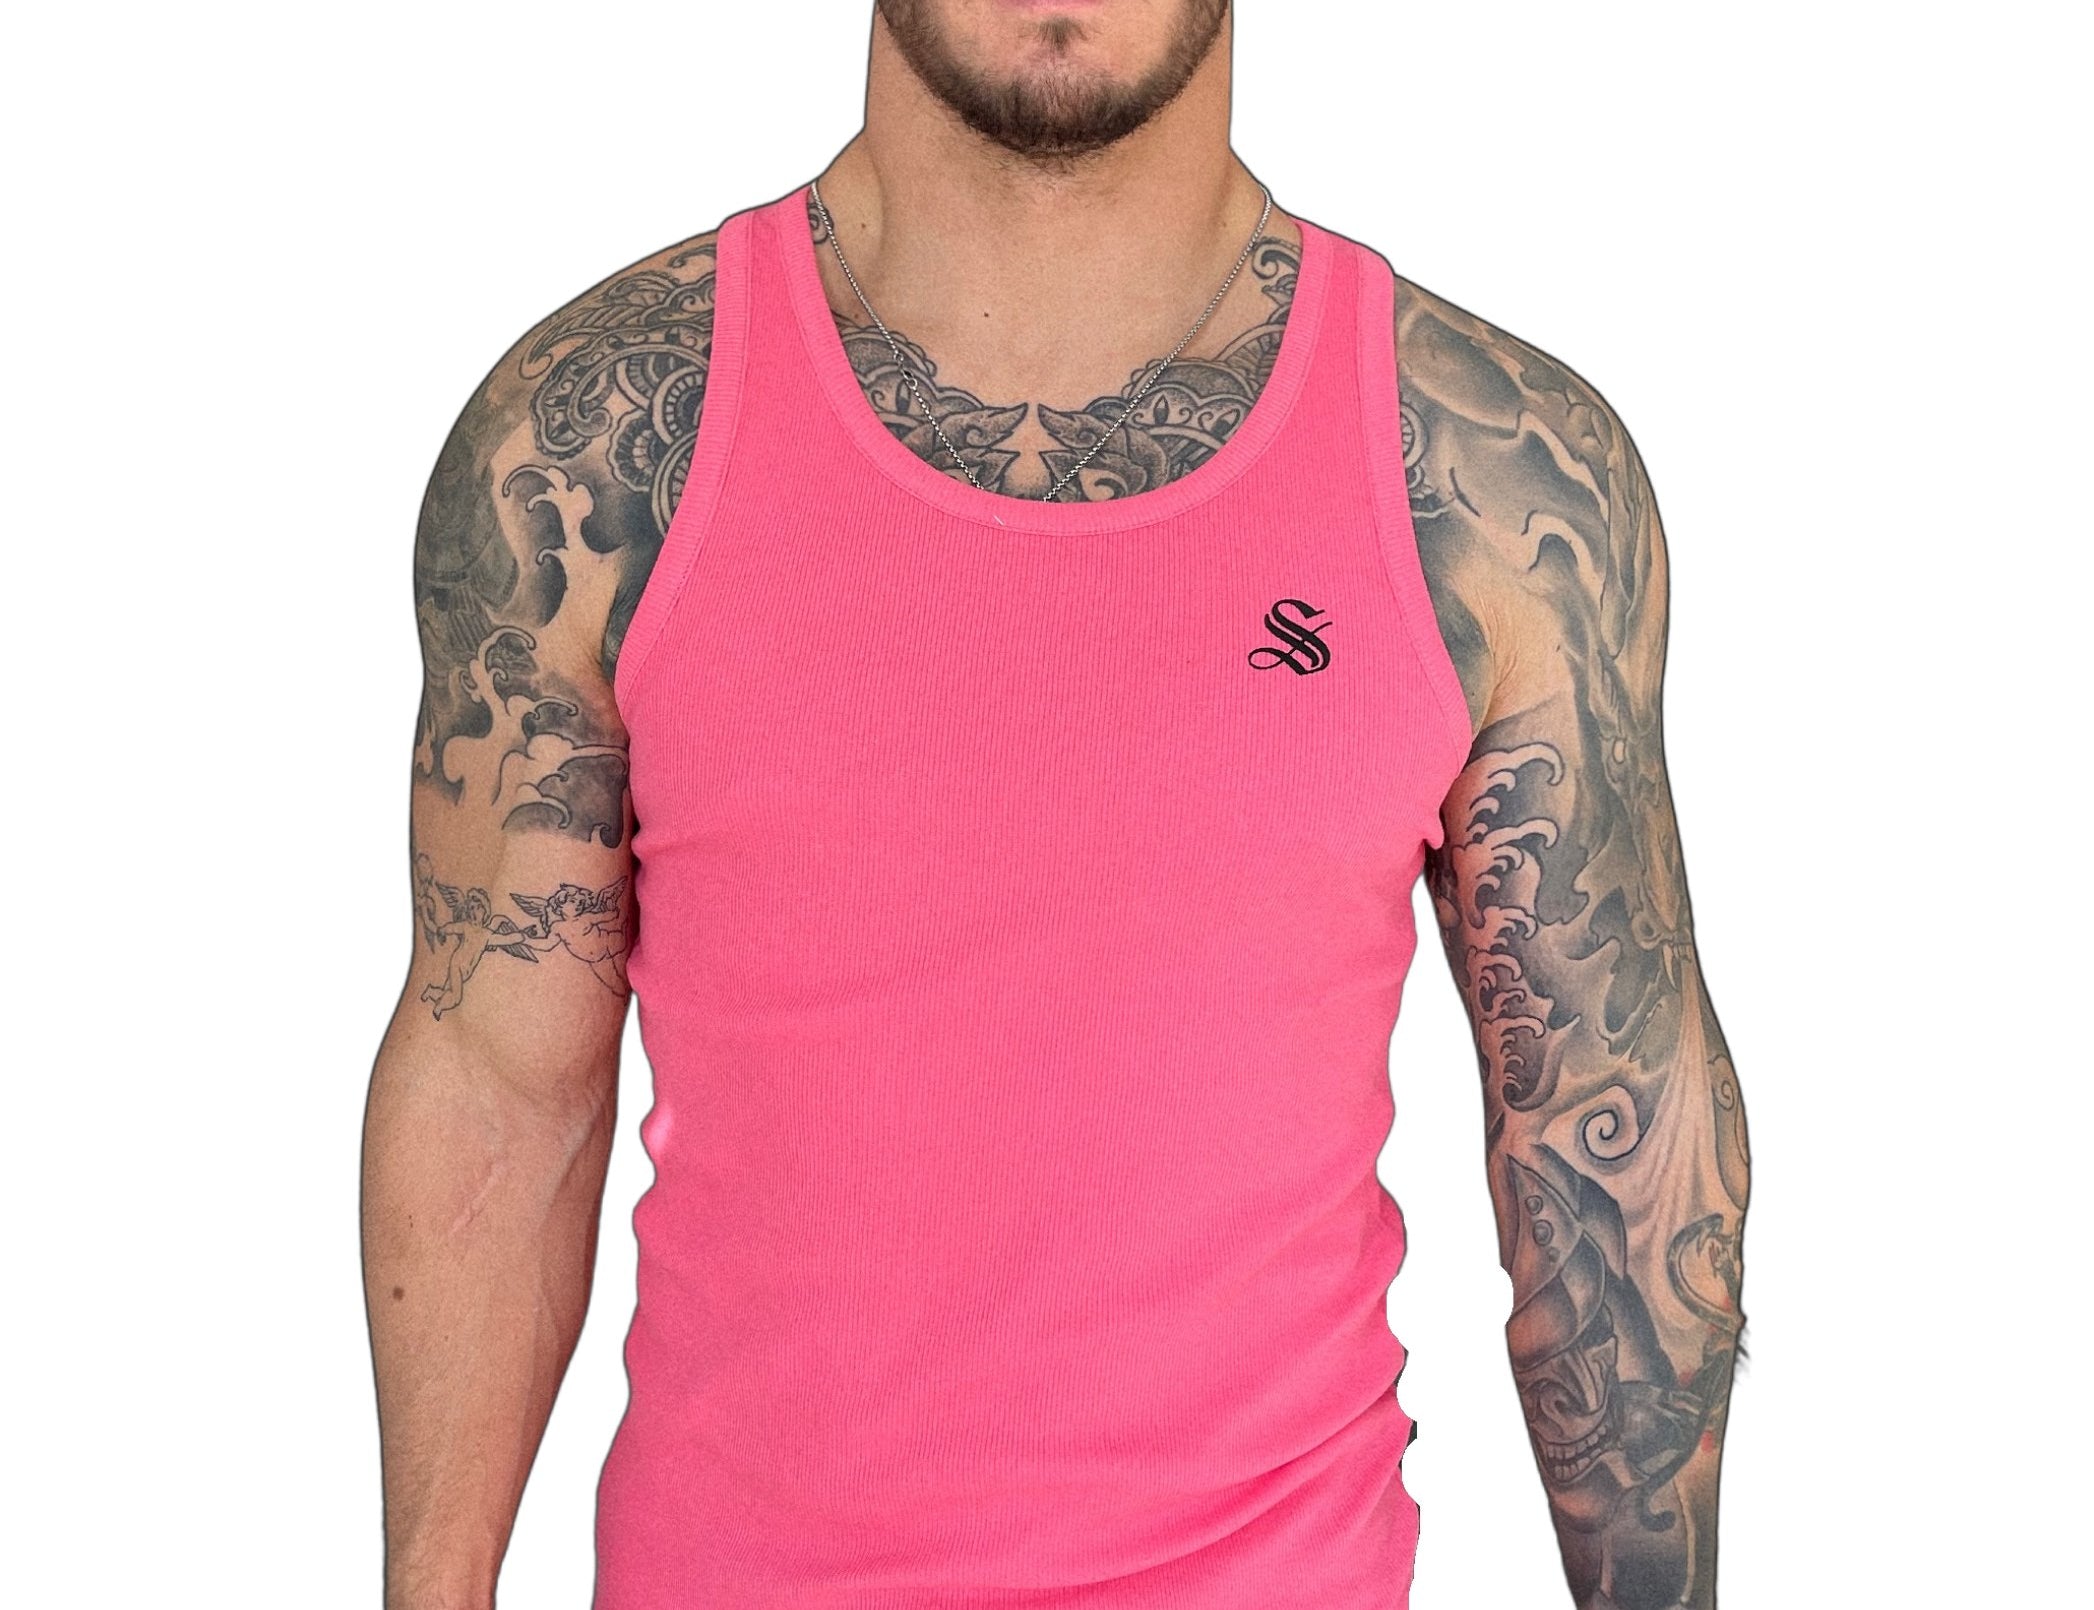 Nosilio - Pink Tank Top for Men - Sarman Fashion - Wholesale Clothing Fashion Brand for Men from Canada